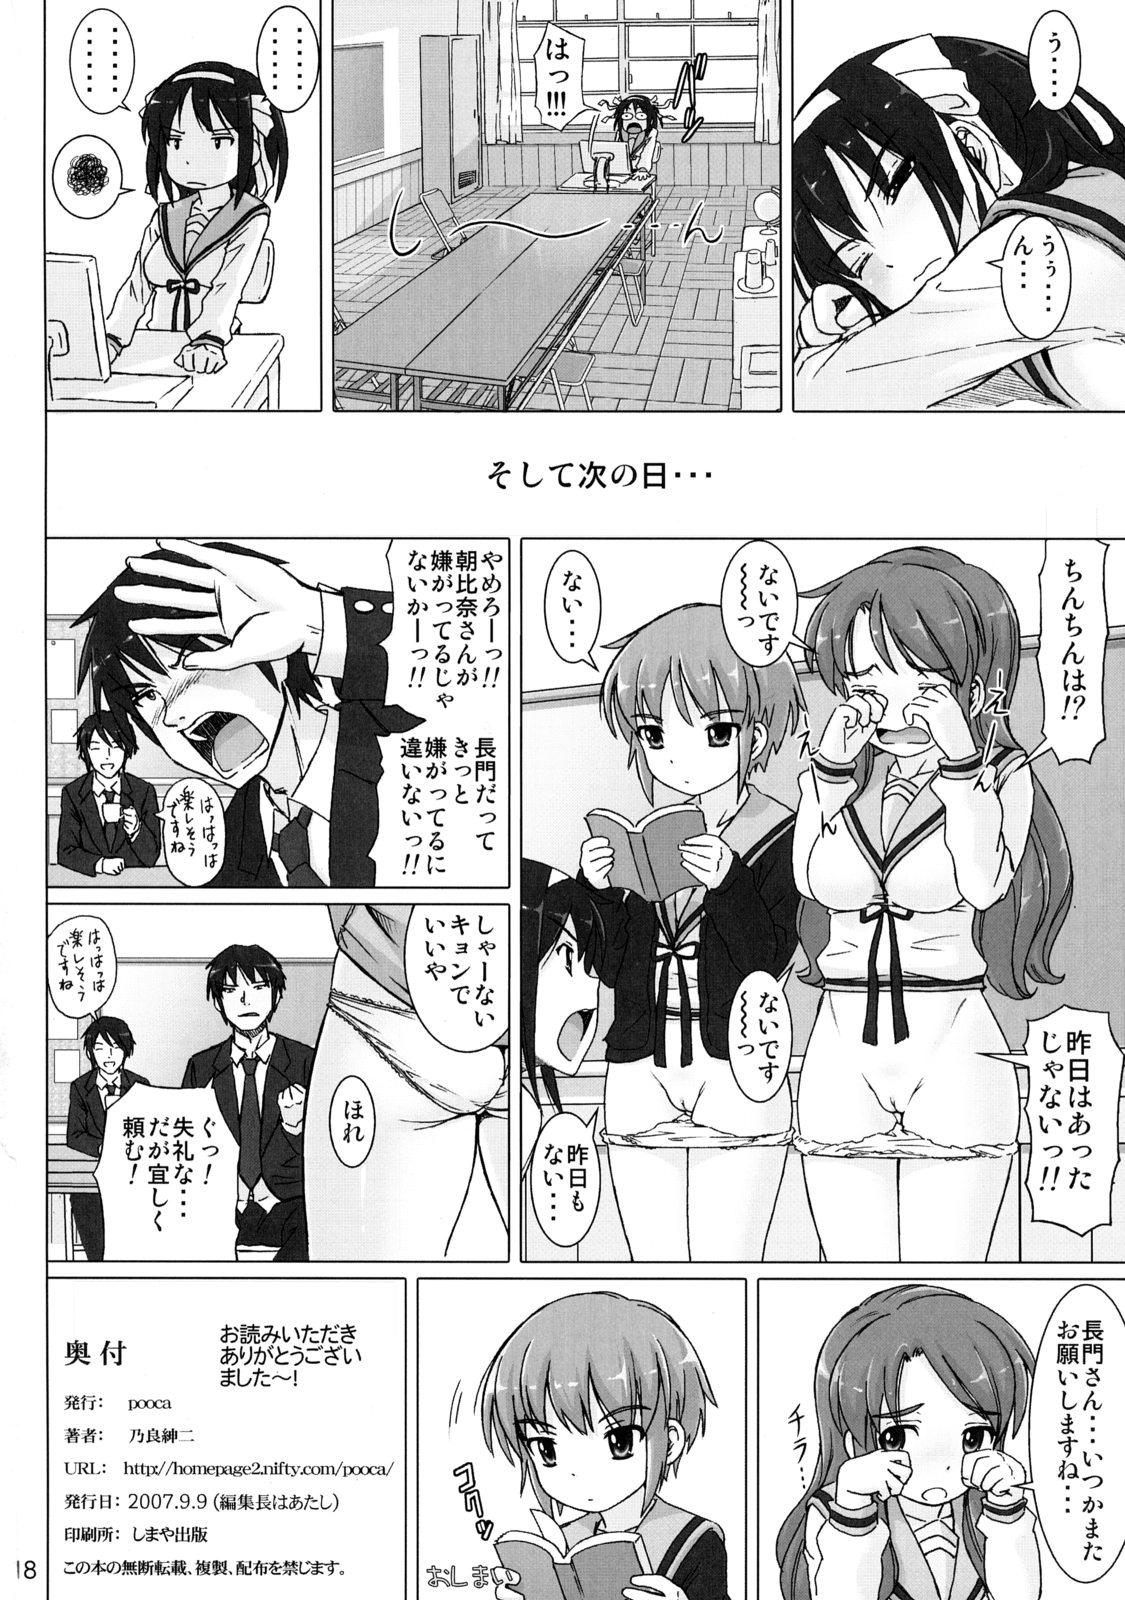 Exhibitionist Cosmic Trance - The melancholy of haruhi suzumiya For - Page 17